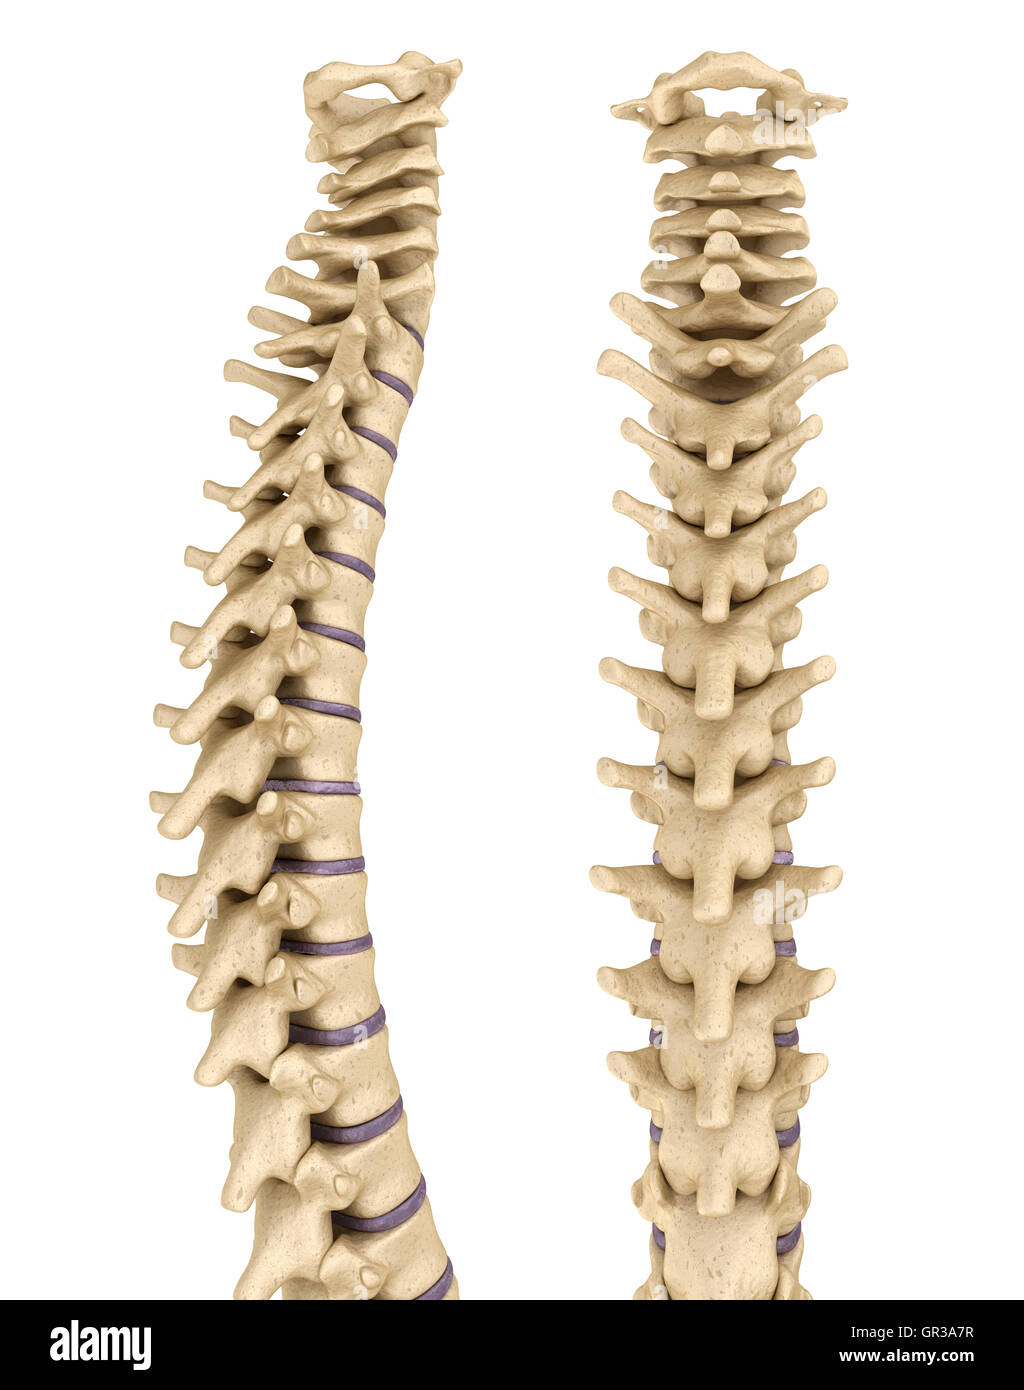 Medically accurate illustration of the human spine 3D render Stock Photo